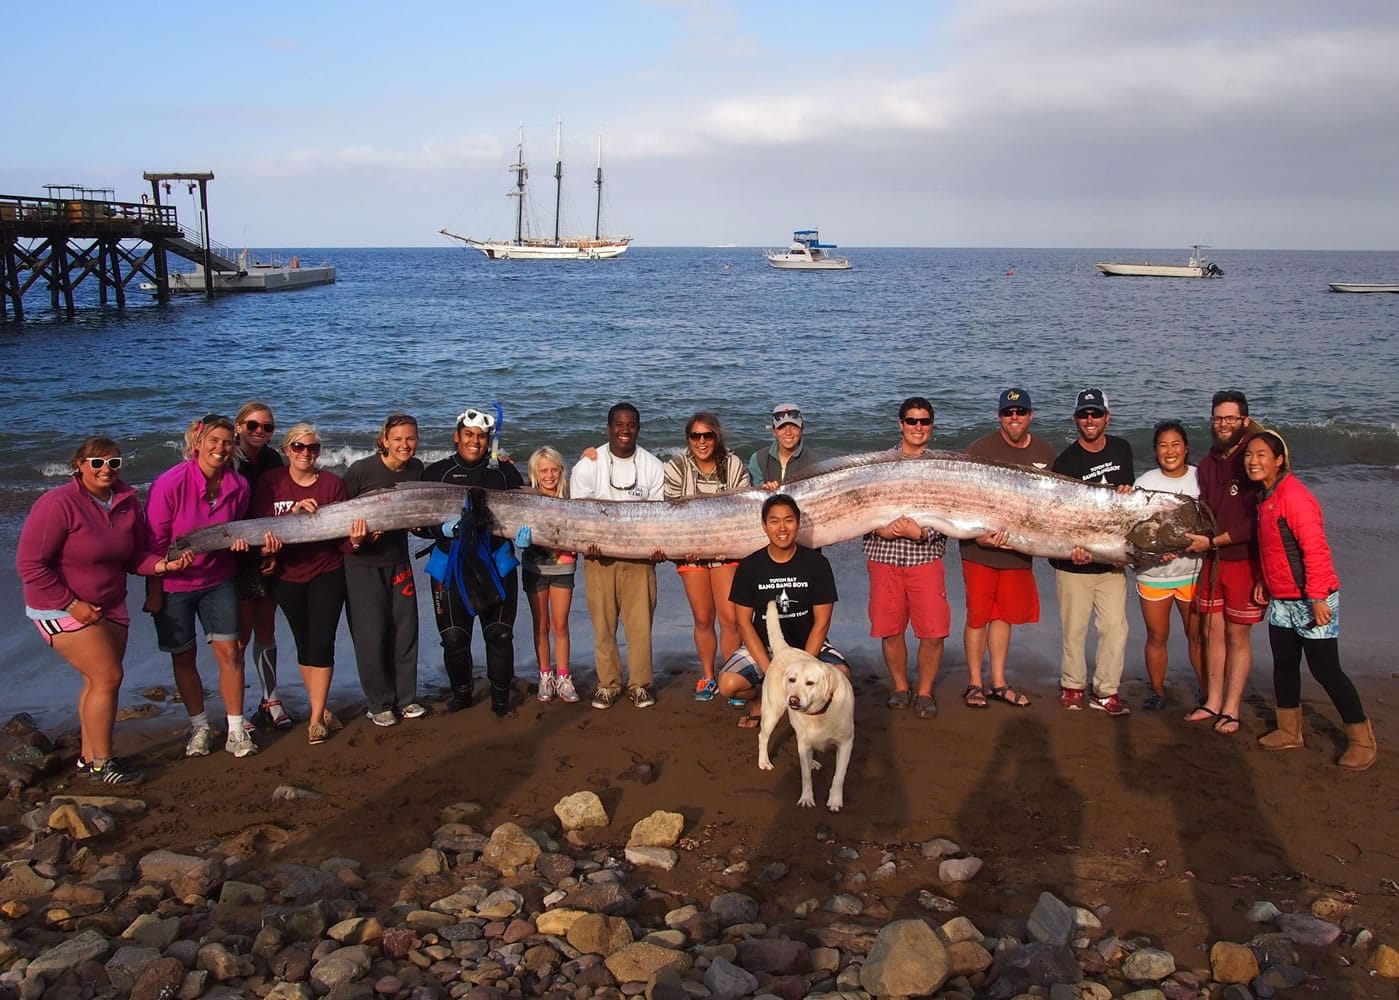 Catalina Island Marine Institute
The crew of a sailing school vessel and Catalina Island Marine Institute instructors hold an 18-foot-long oarfish that was found on Santa Catalina Island, Calif., on Sunday.